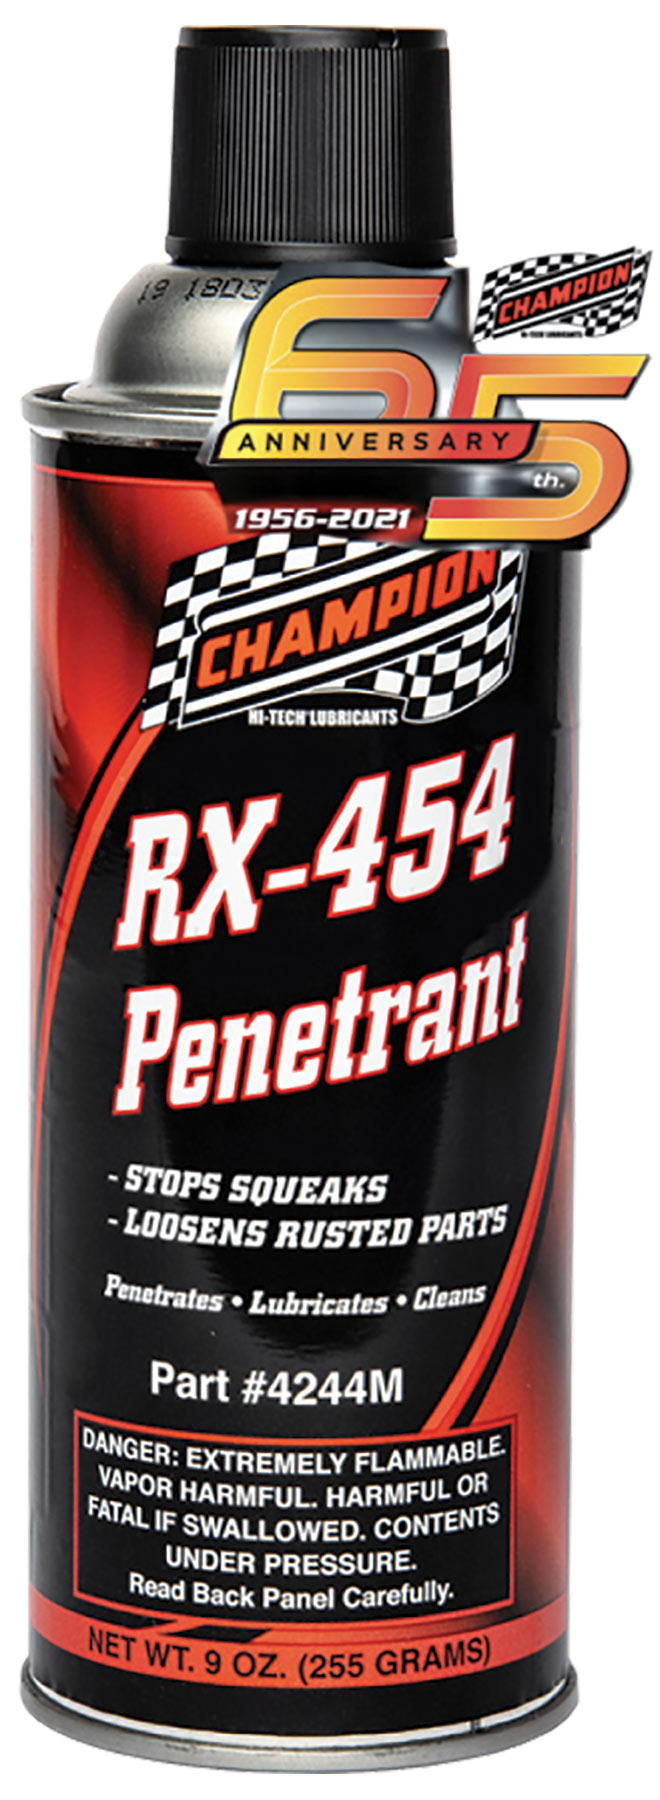 Canister of Champion's RX-454 penetrating oil